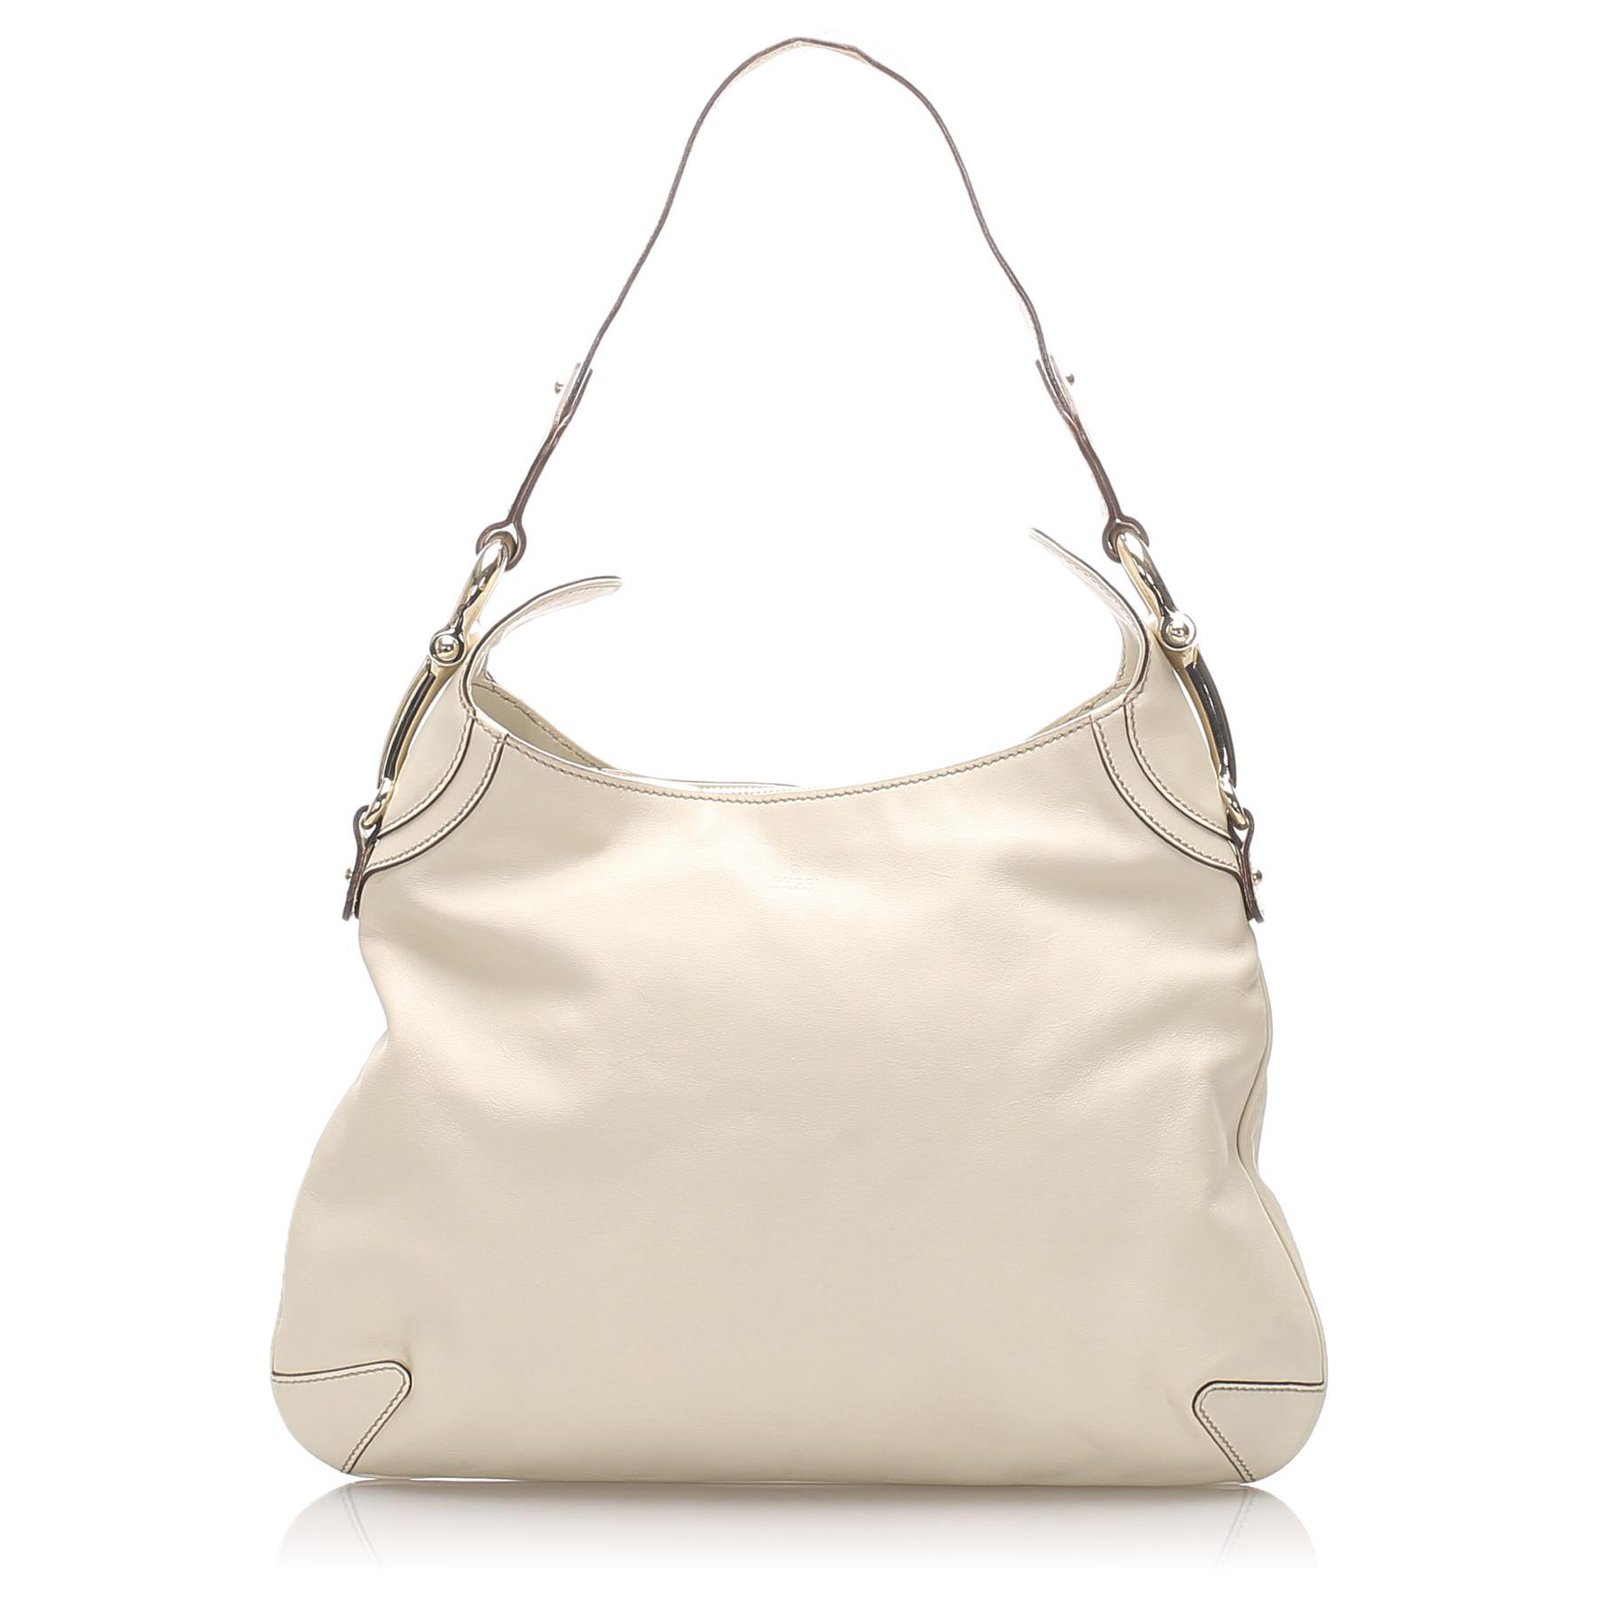 Gucci White Horsebit Leather Creole Shoulder Bag Pony-style calfskin ...